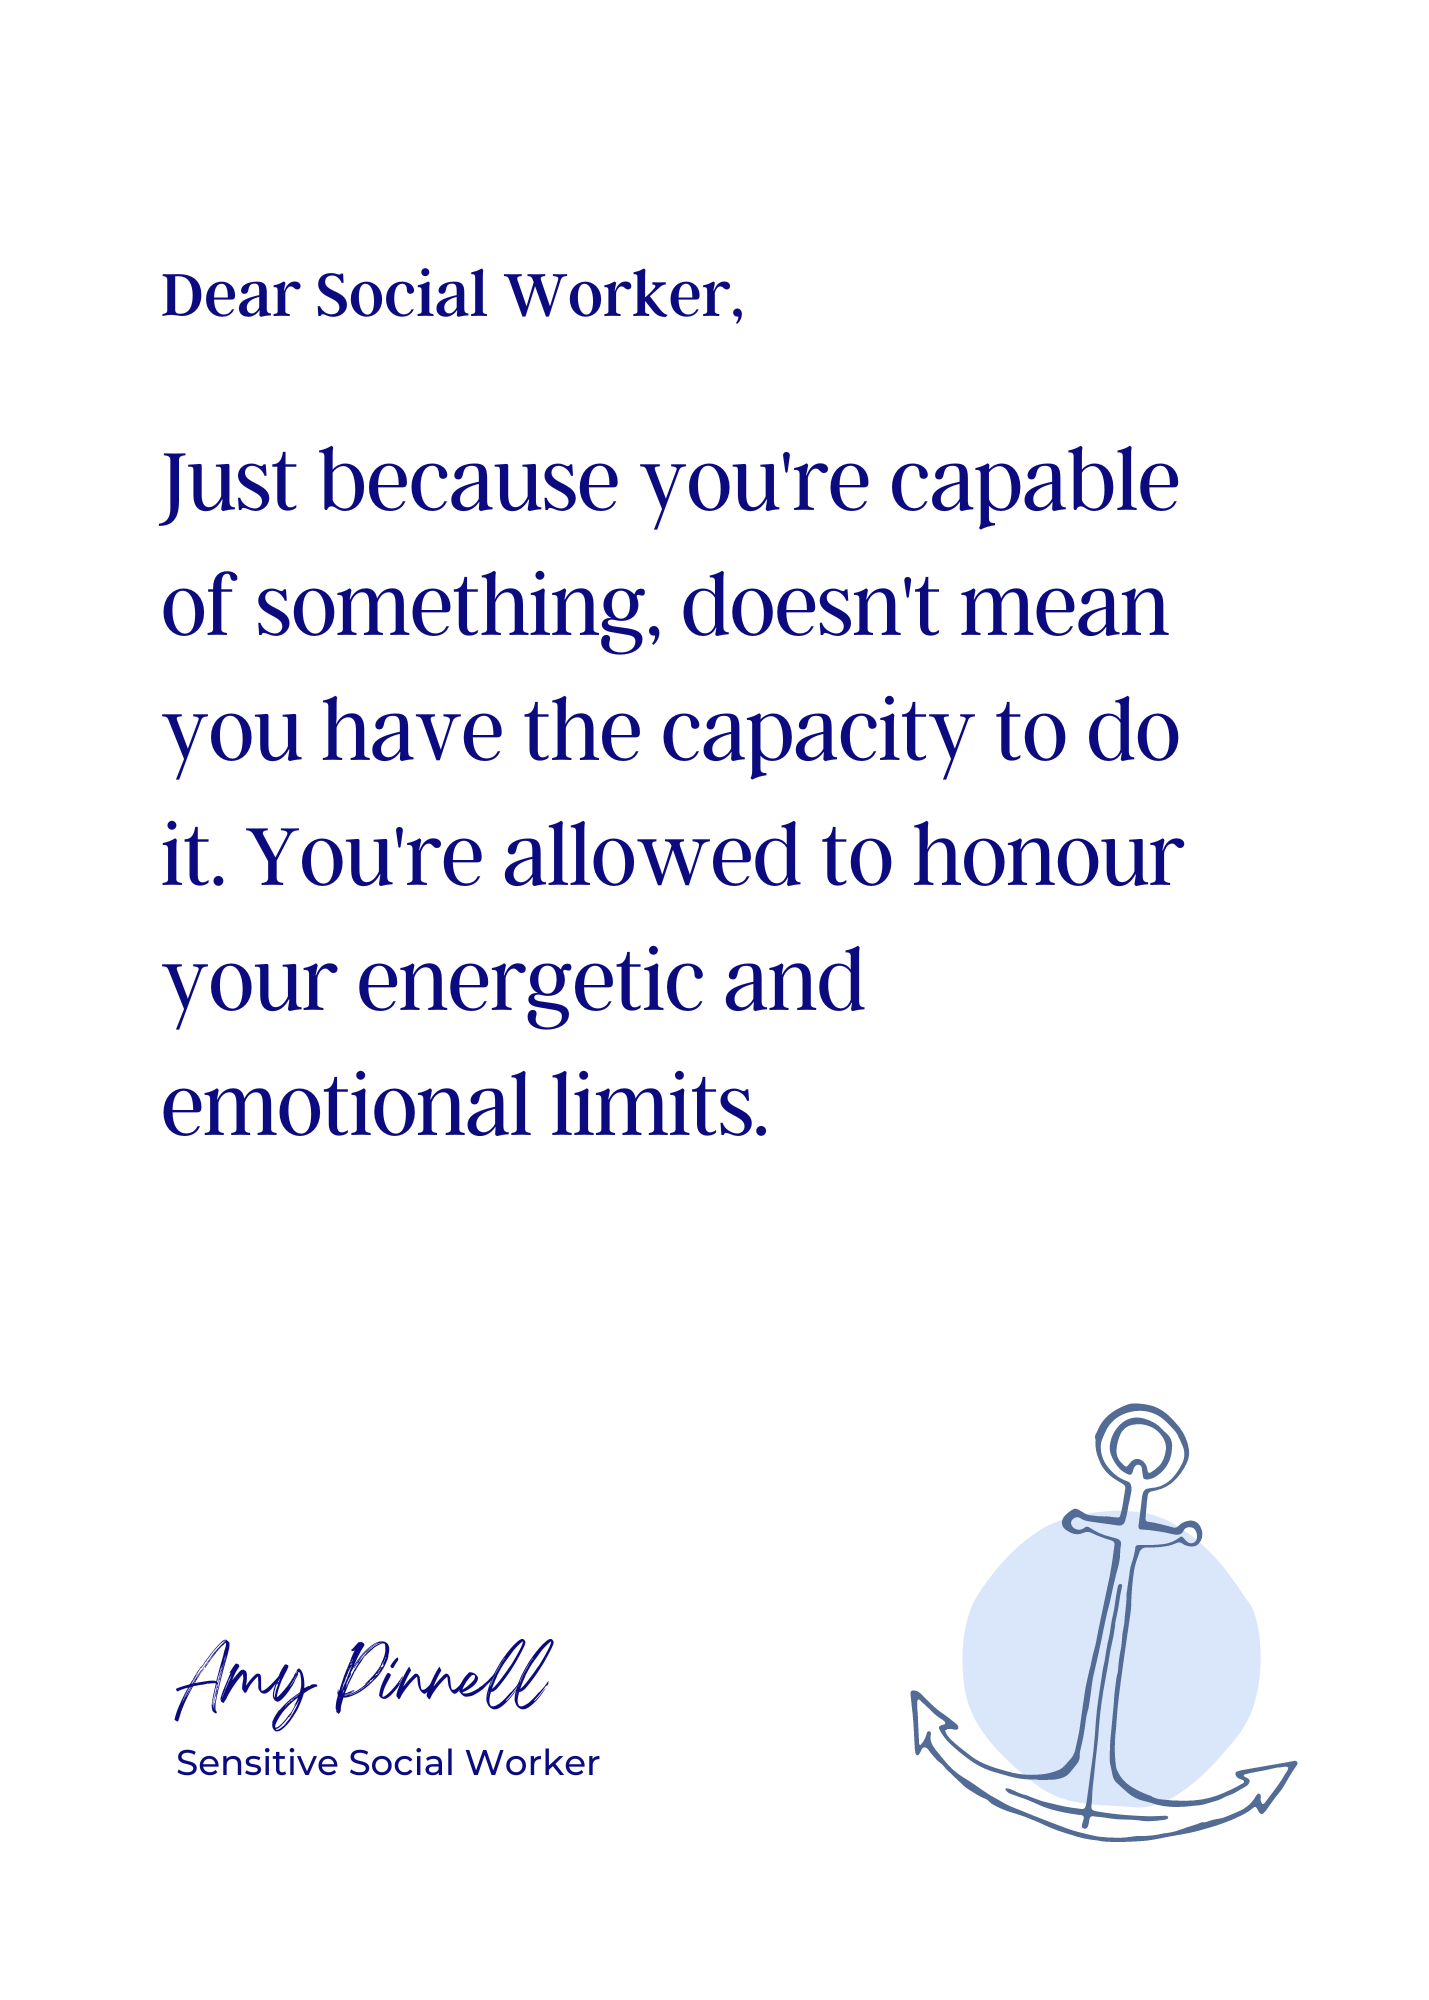 An electronic version of the print is shown. The print is white with dark purple font and reads "Dear Social Worker, Just because you're capable of something, doesn't mean you have the capacity to do it. You're allowed to honour your energetic and emotional limits. Amy Pinnell, Sensitive Social Worker". In the bottom right corner of the print is a sketch of a blue anchor.